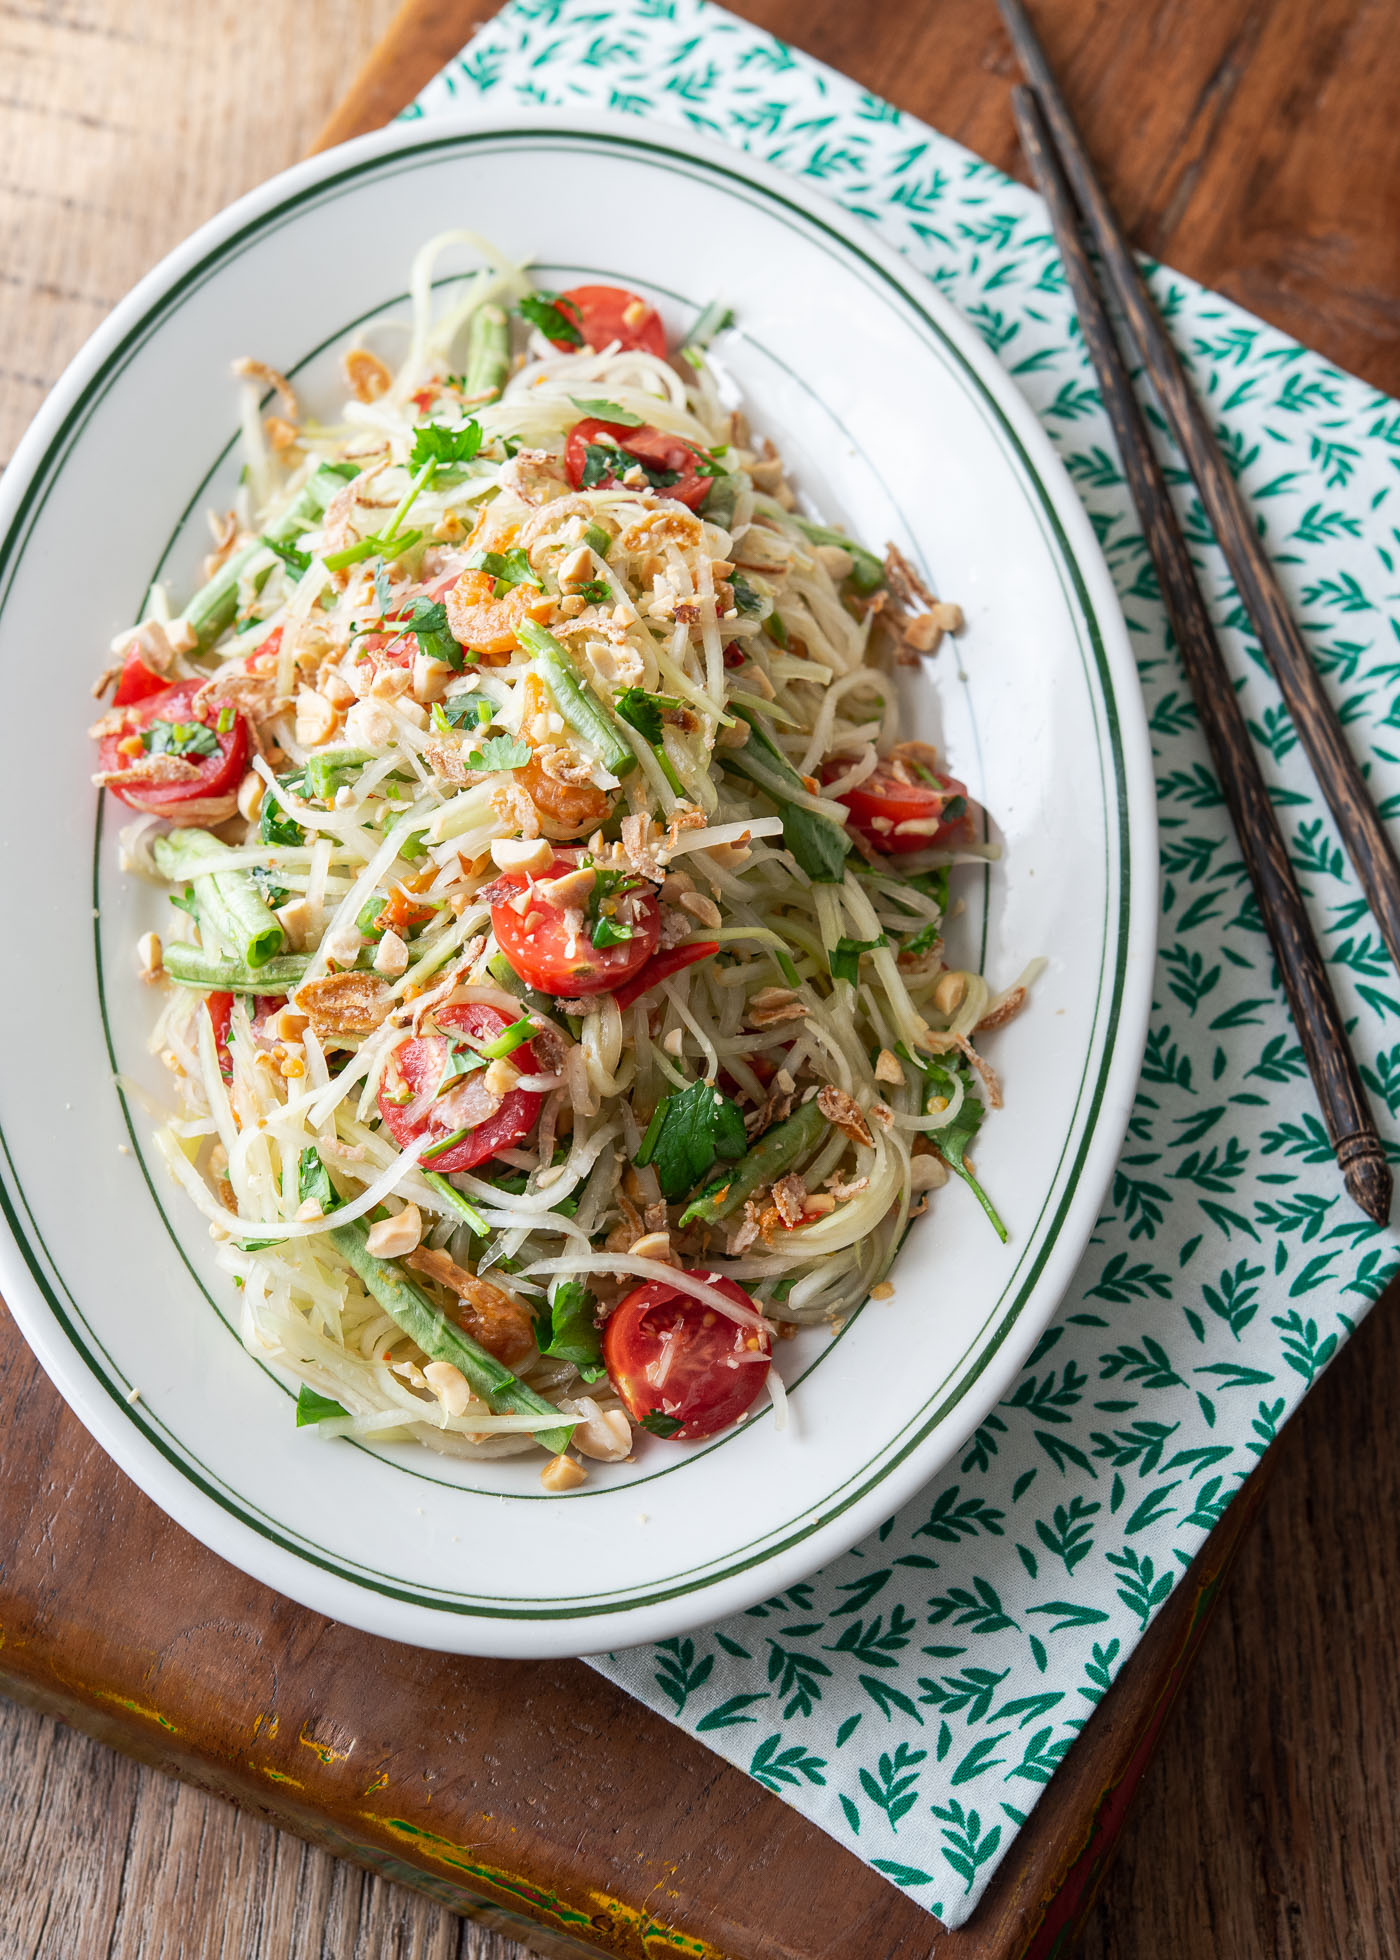 A top view of Som Tam (Thai Papaya salad) served on a white oval plate.